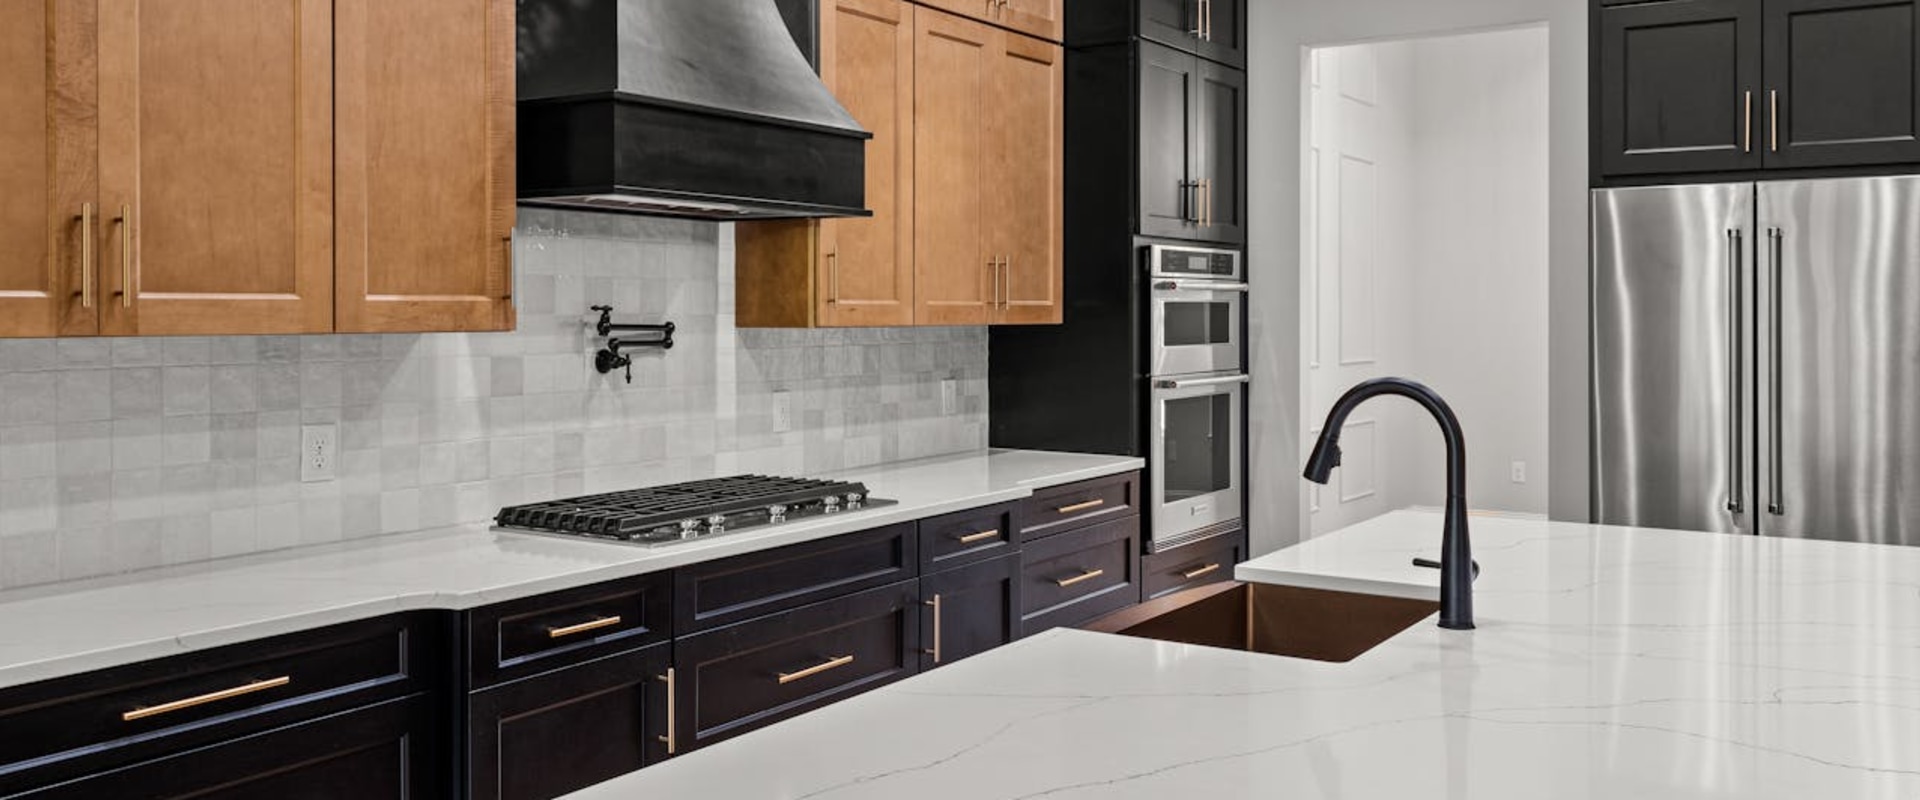 Comparing Different Countertop Materials: A Comprehensive Guide for Residential Construction and Remodeling